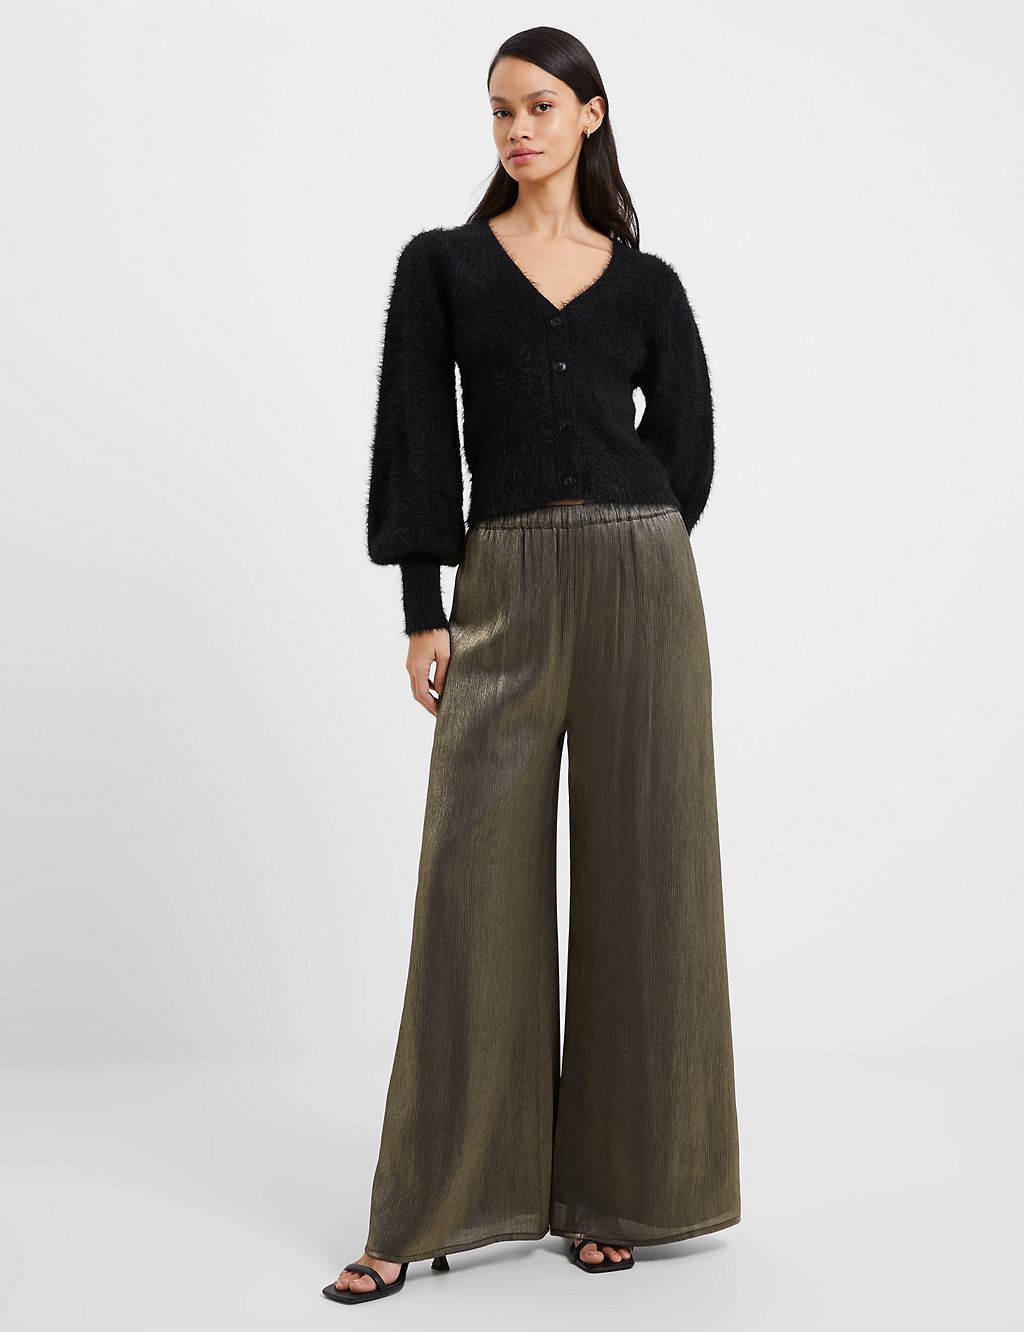 Sparkly Elasticated Waist Wide Leg Trousers | French Connection | M&S